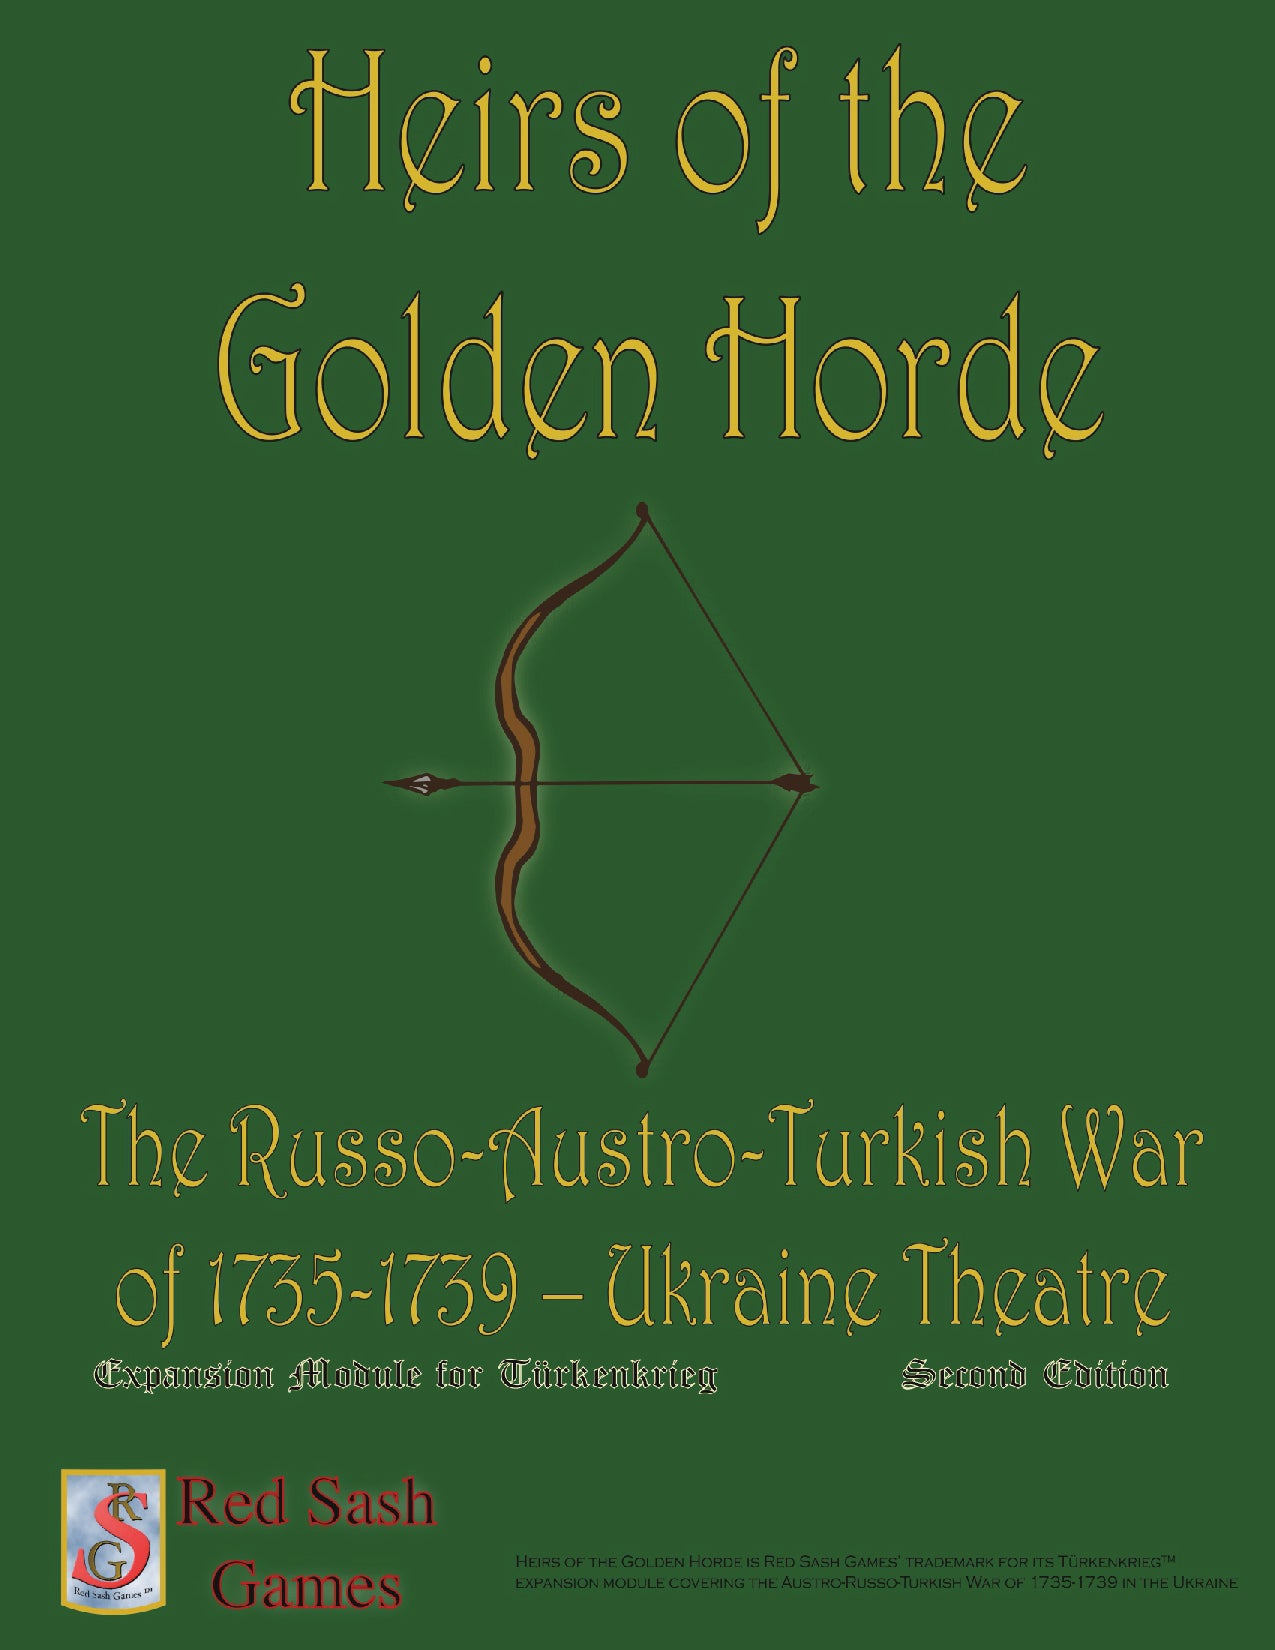 Heirs of the Golden Horde